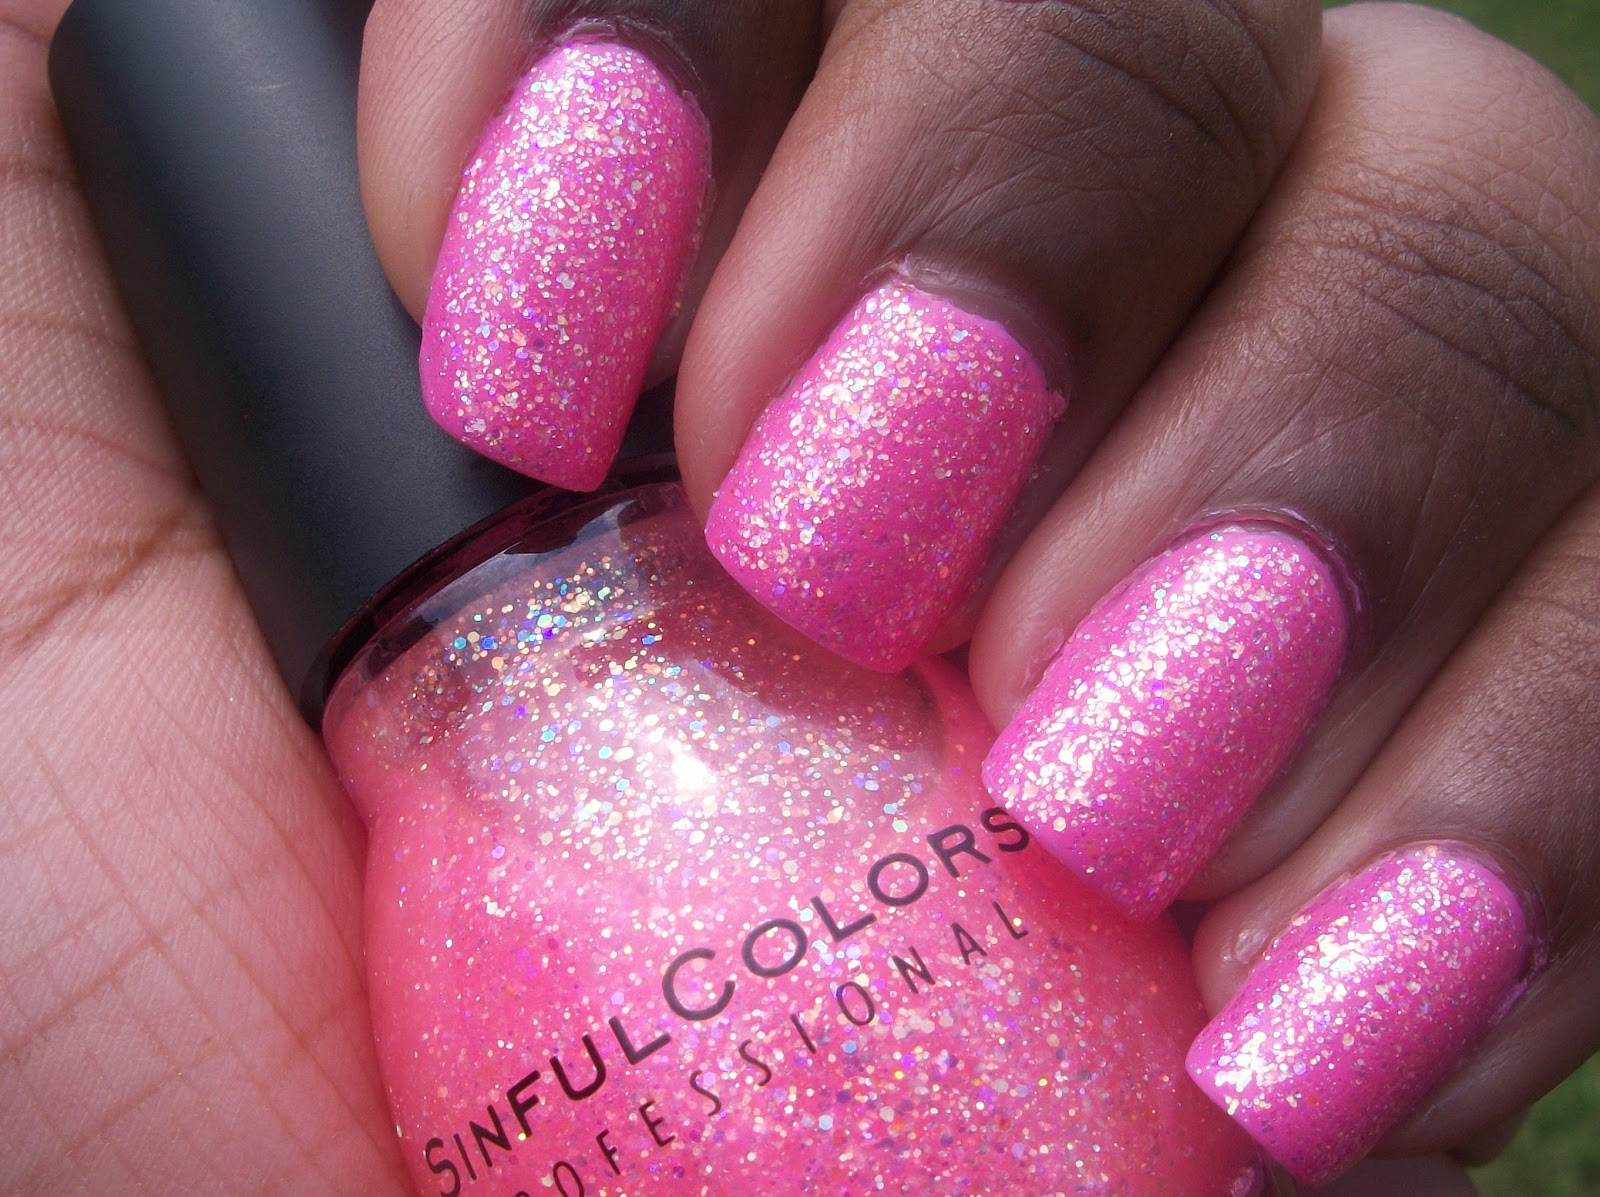 10. Sinful Colors Professional Nail Polish in "Pinky Glitter" - wide 4